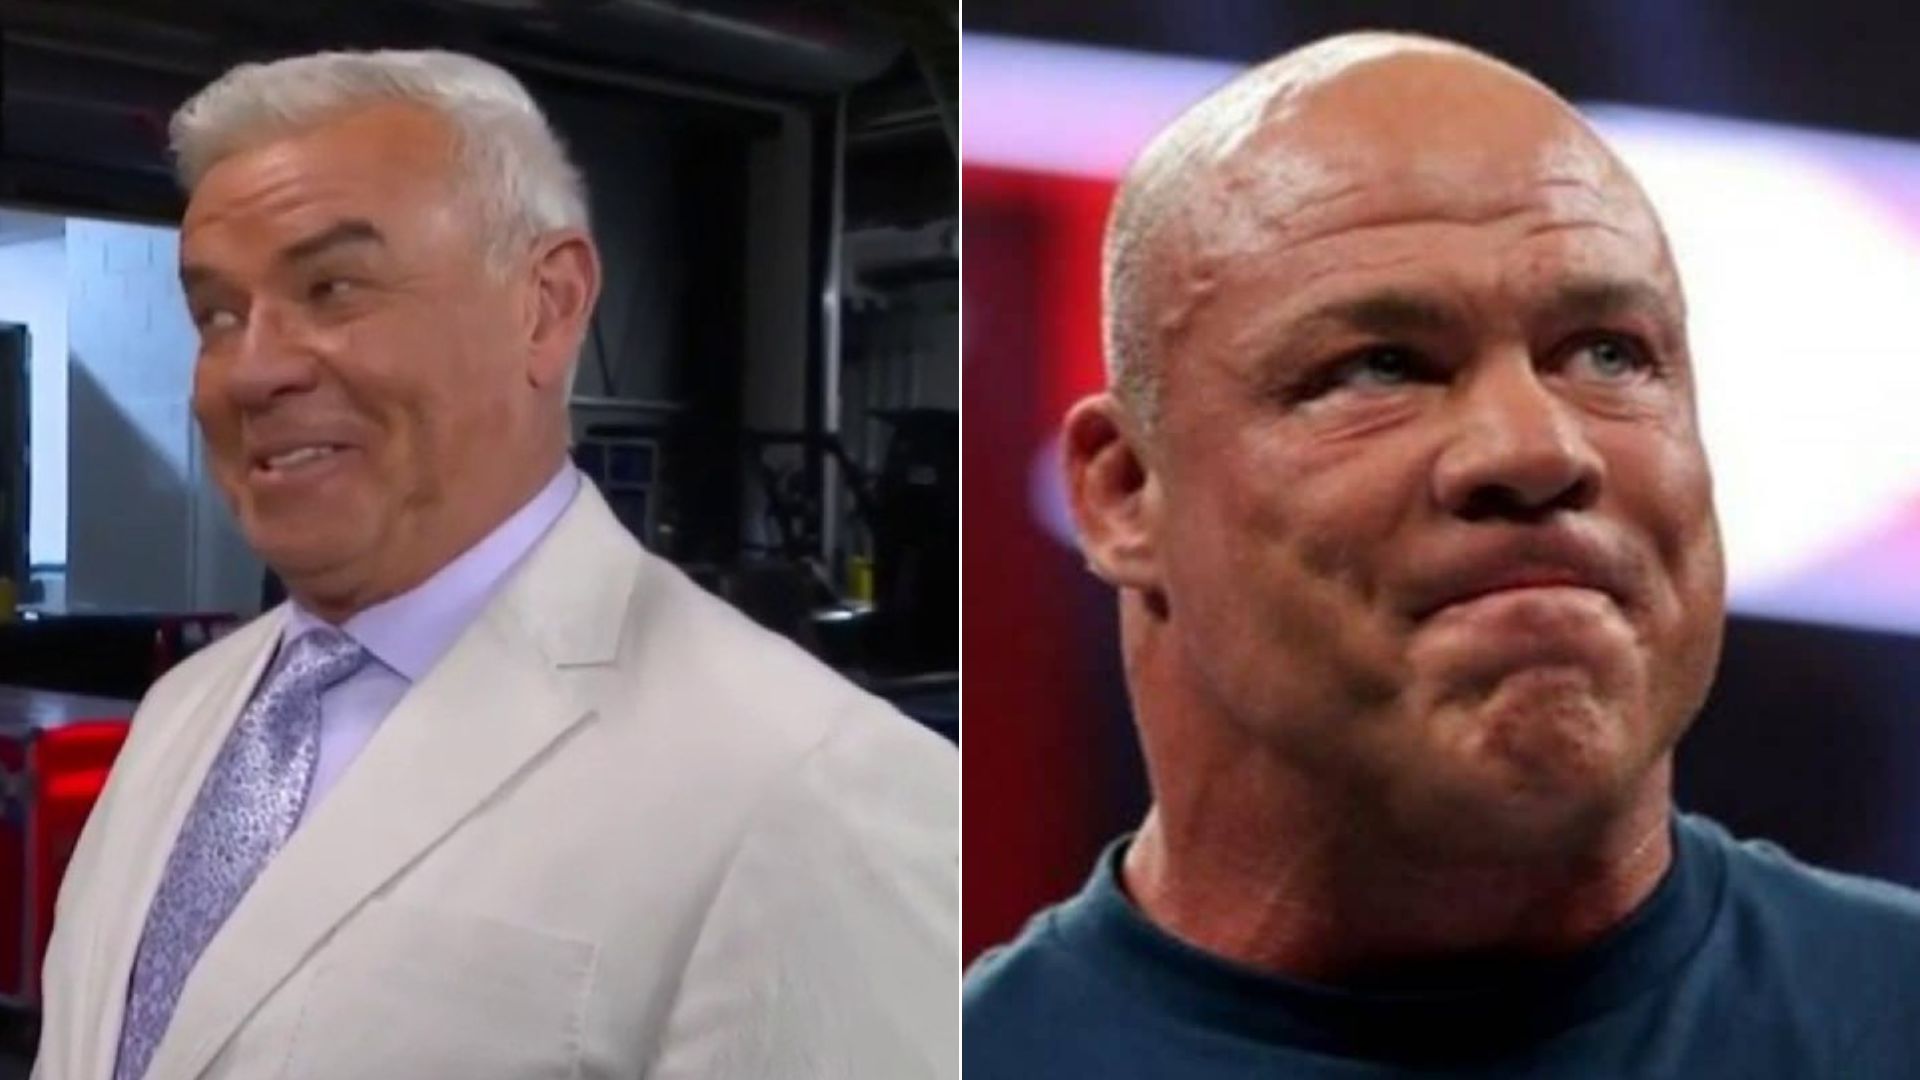 Eric Bischoff has drawn parallels between a current star and Kurt Angle